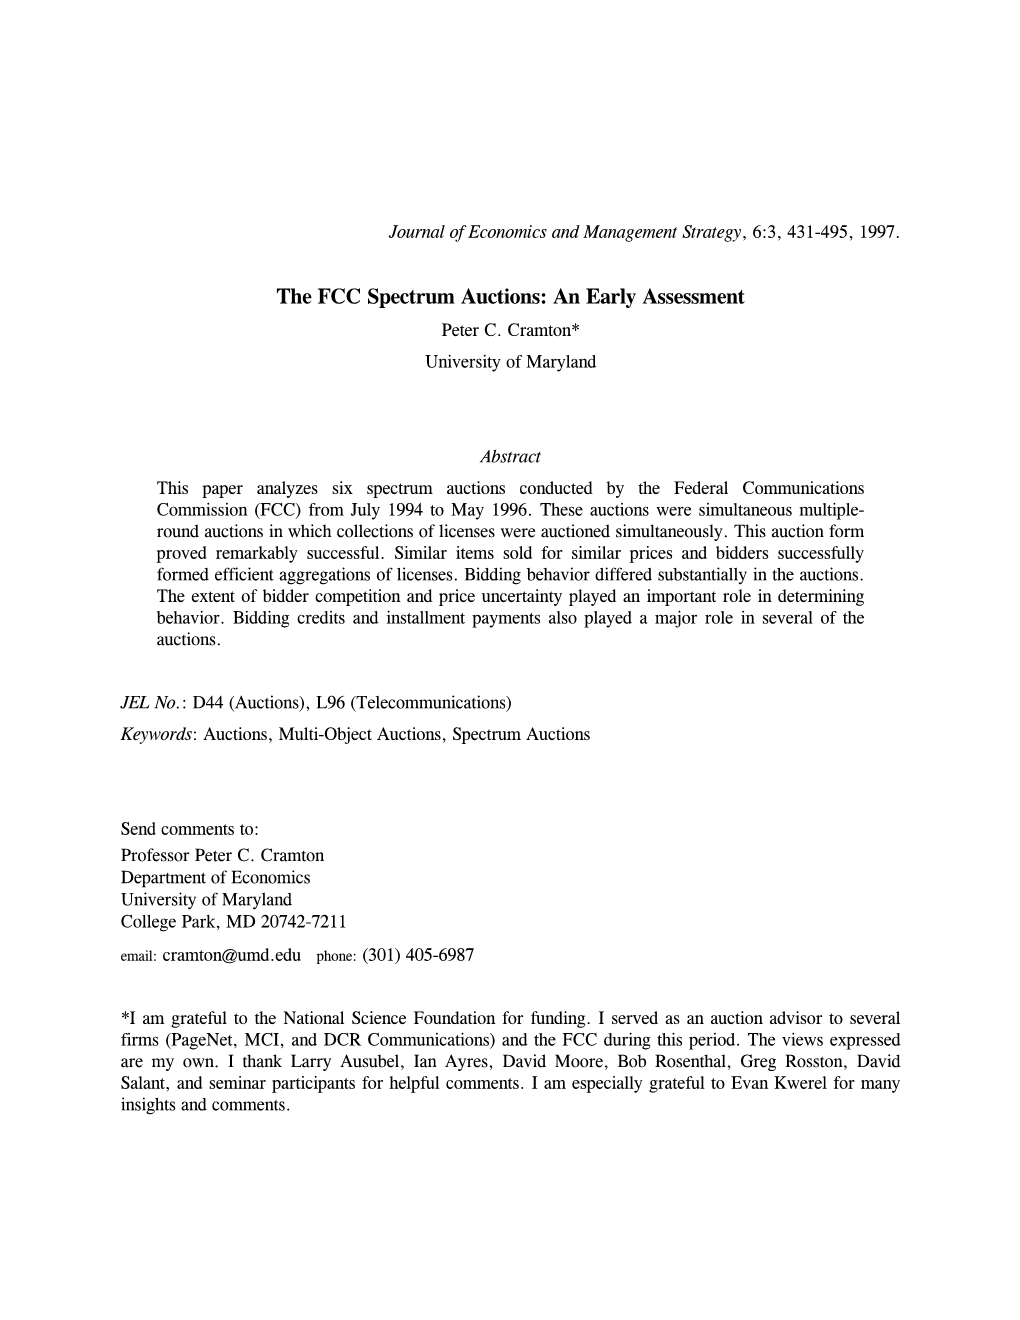 “The FCC Spectrum Auctions: an Early Assessment,” Journal of Economics and Management Strategy